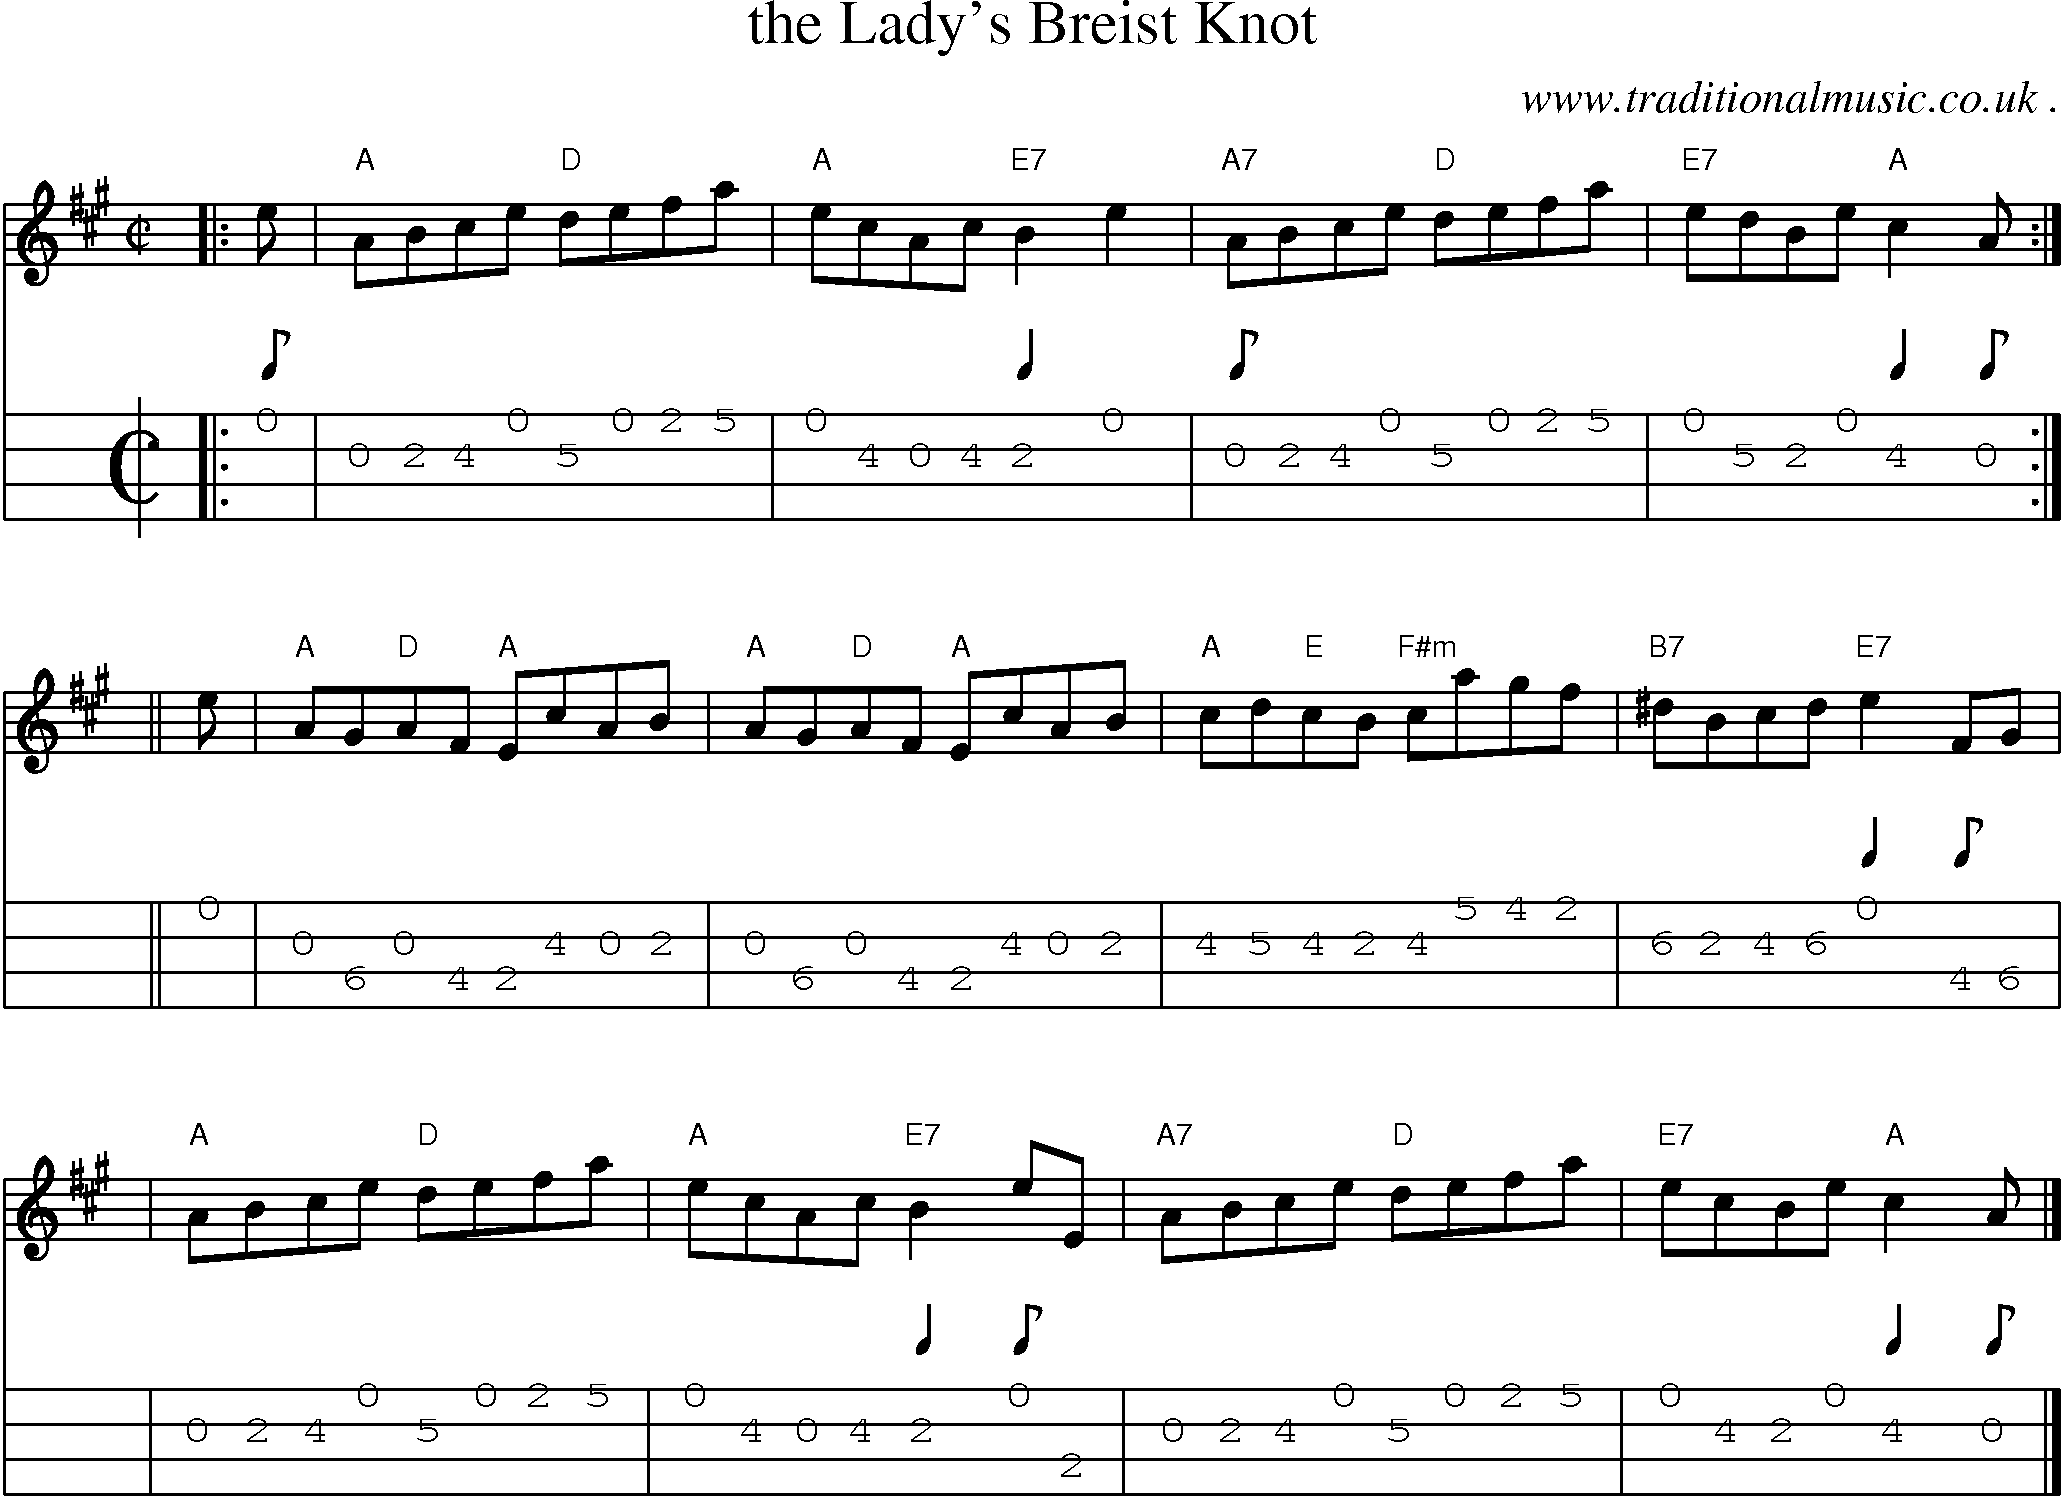 Sheet-music  score, Chords and Mandolin Tabs for The Ladys Breist Knot